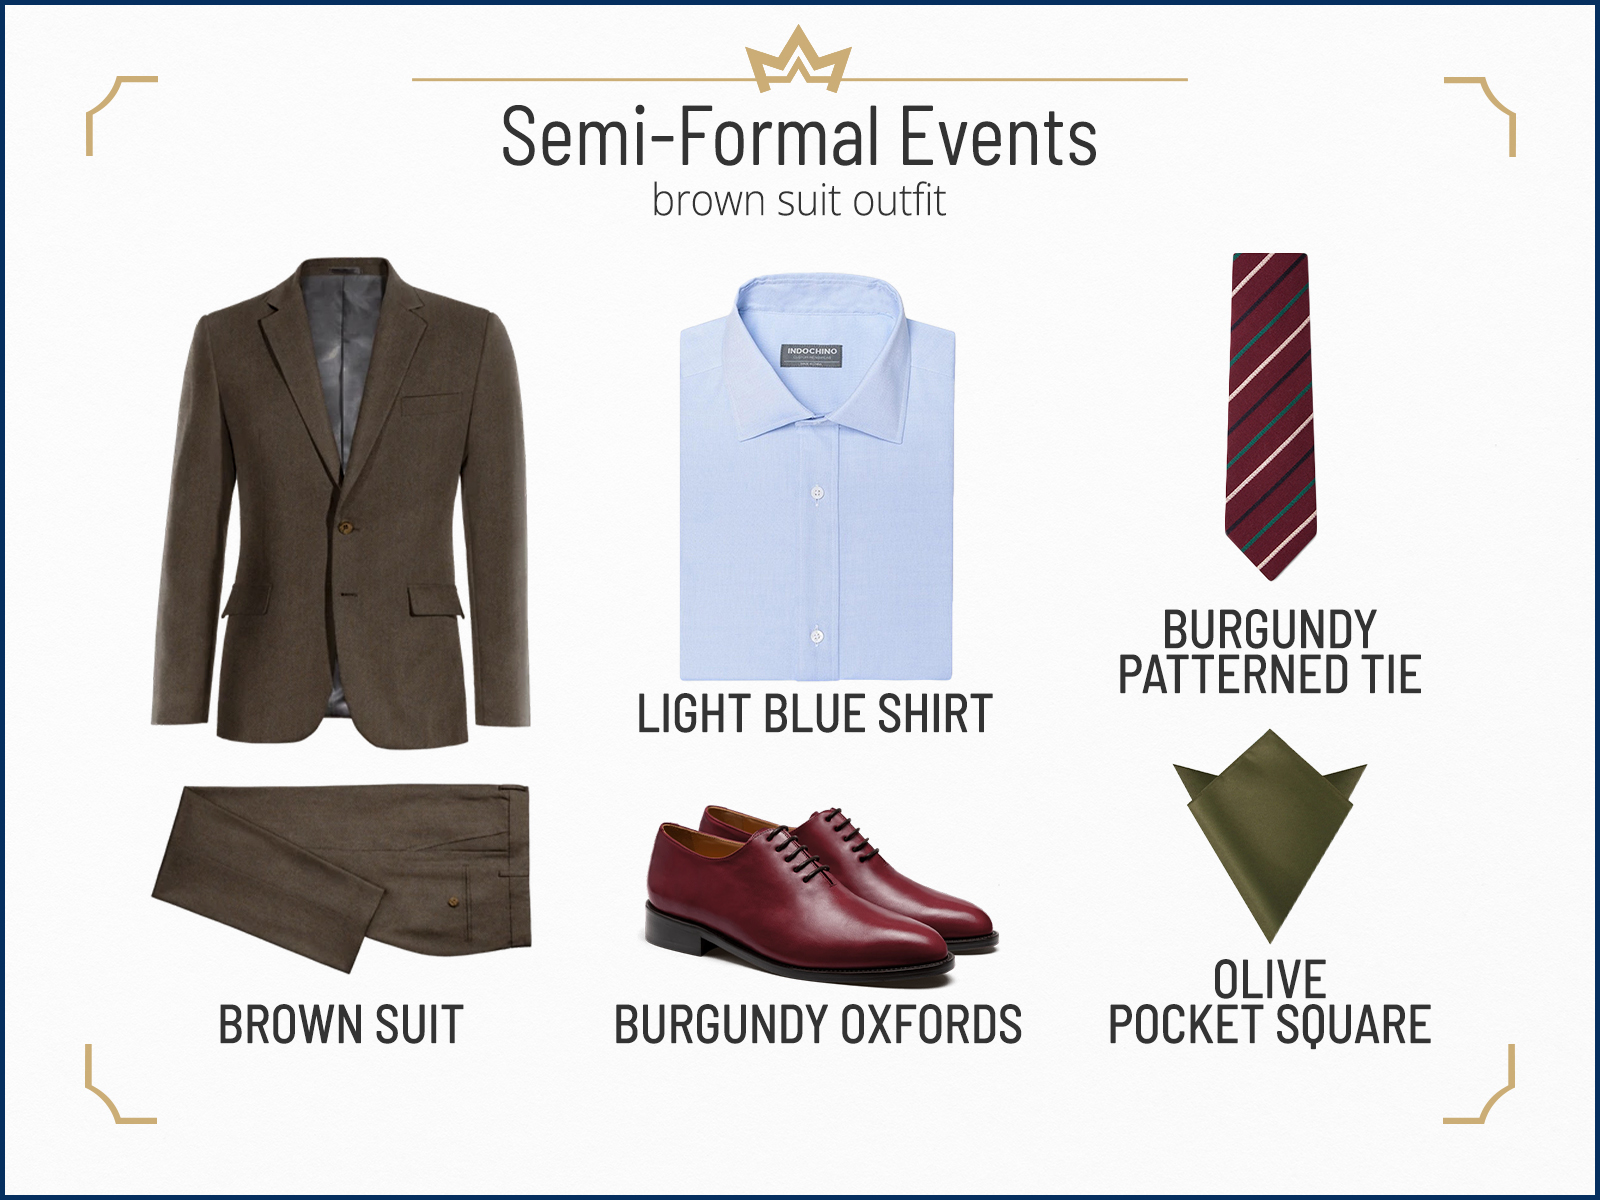 How to wear a brown suit as a semi-formal outfit